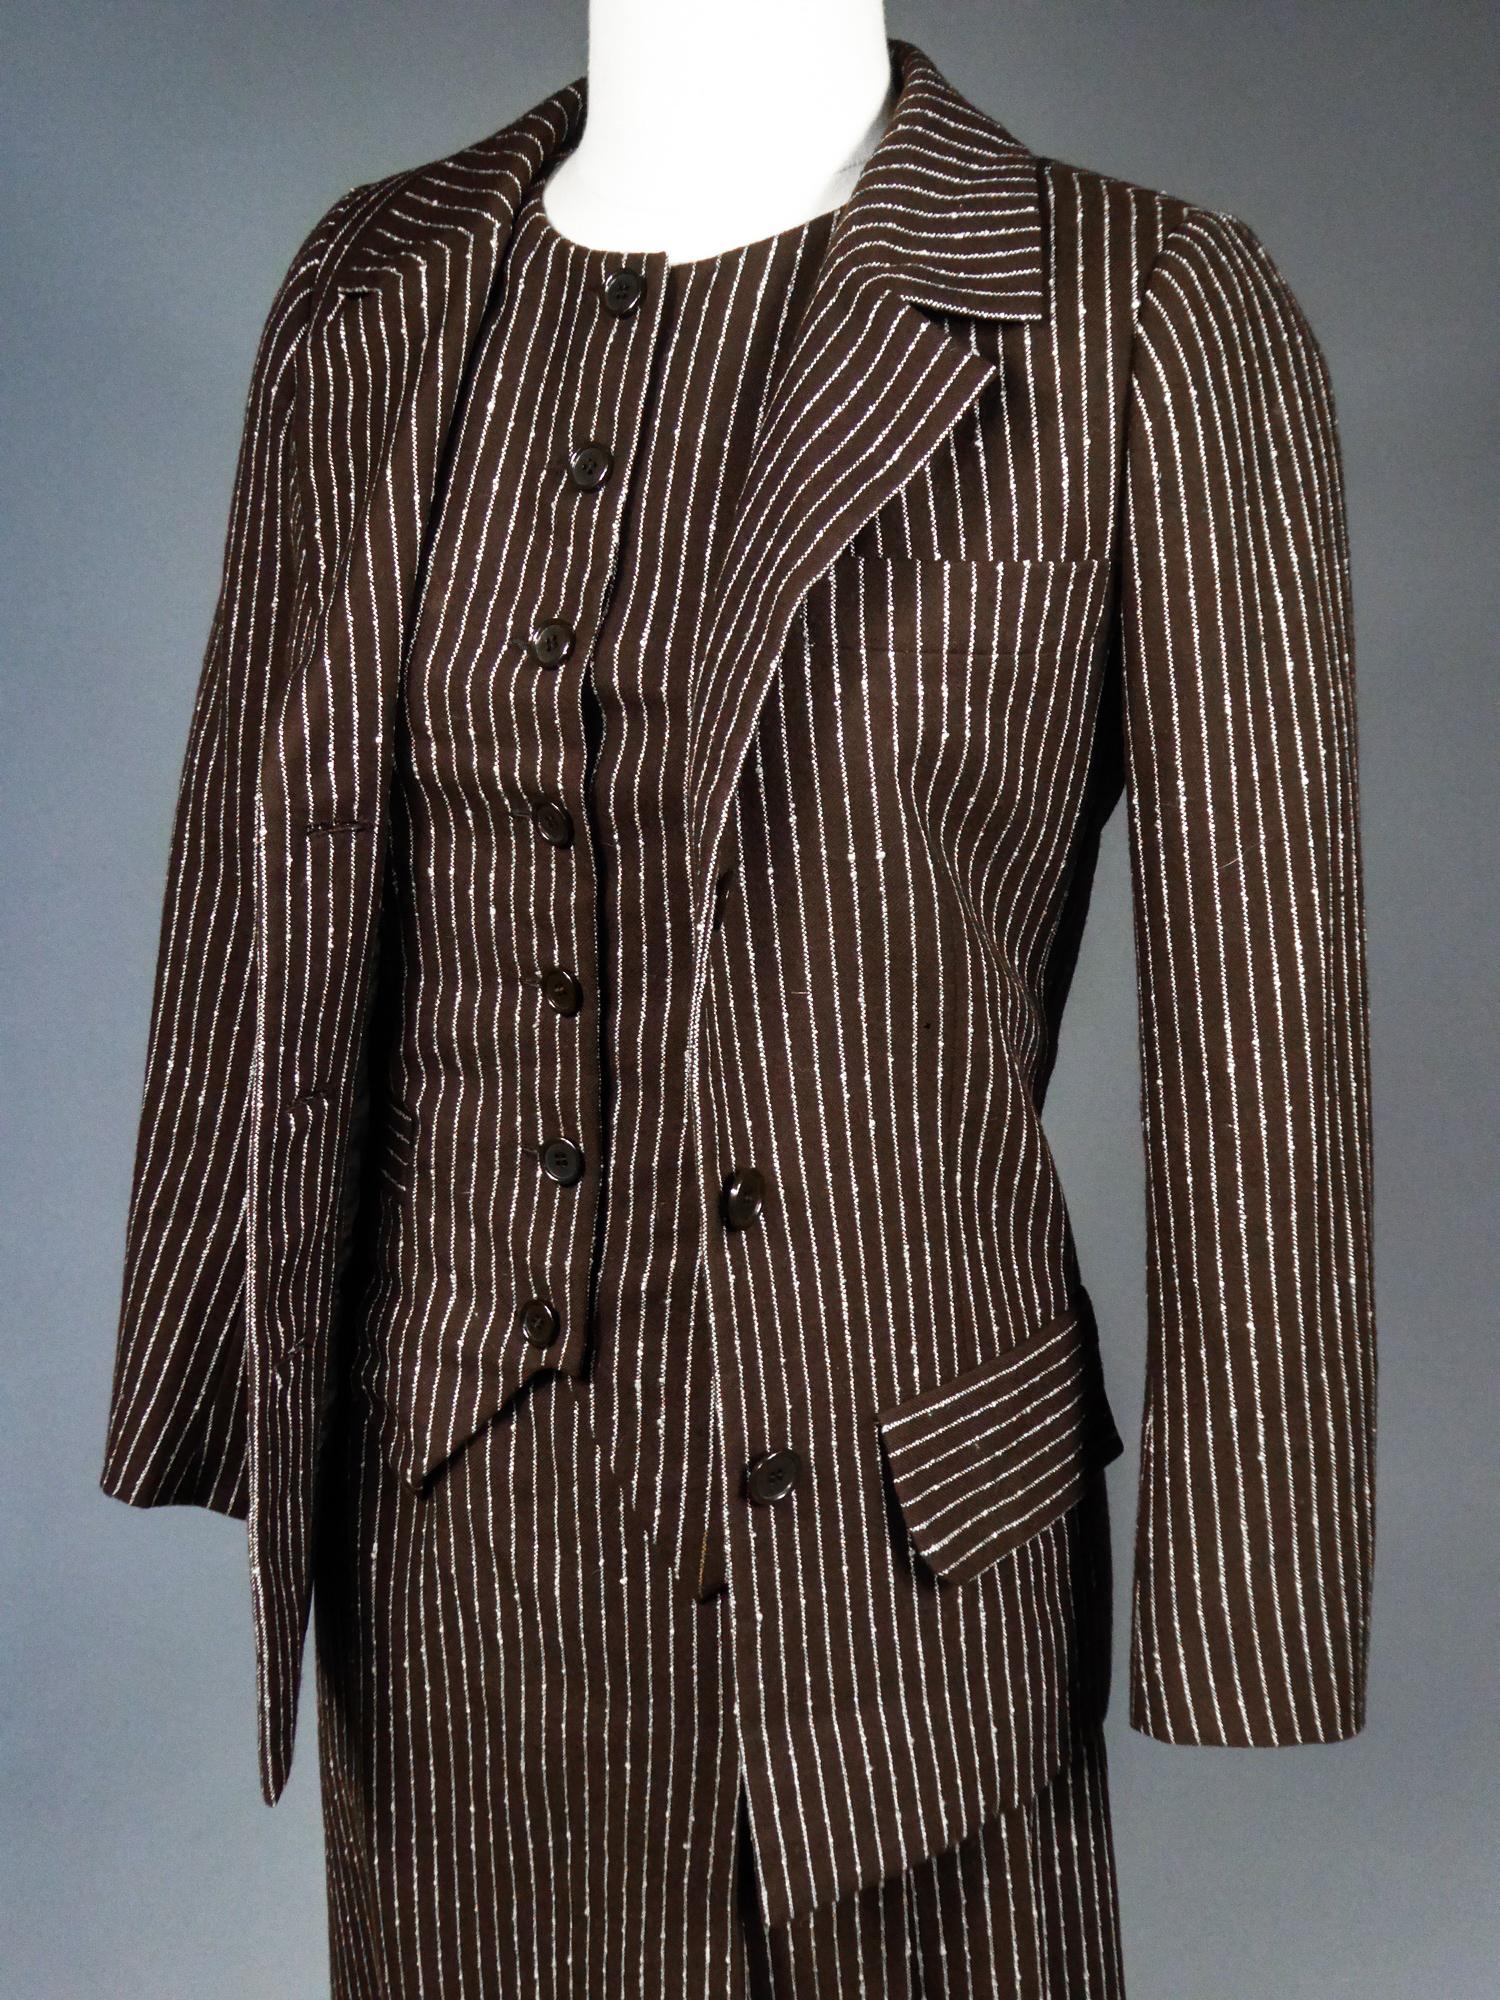 Yves Saint Laurent Haute Couture skirt-suit numbered 14539 Circa 1967/1970 For Sale 6